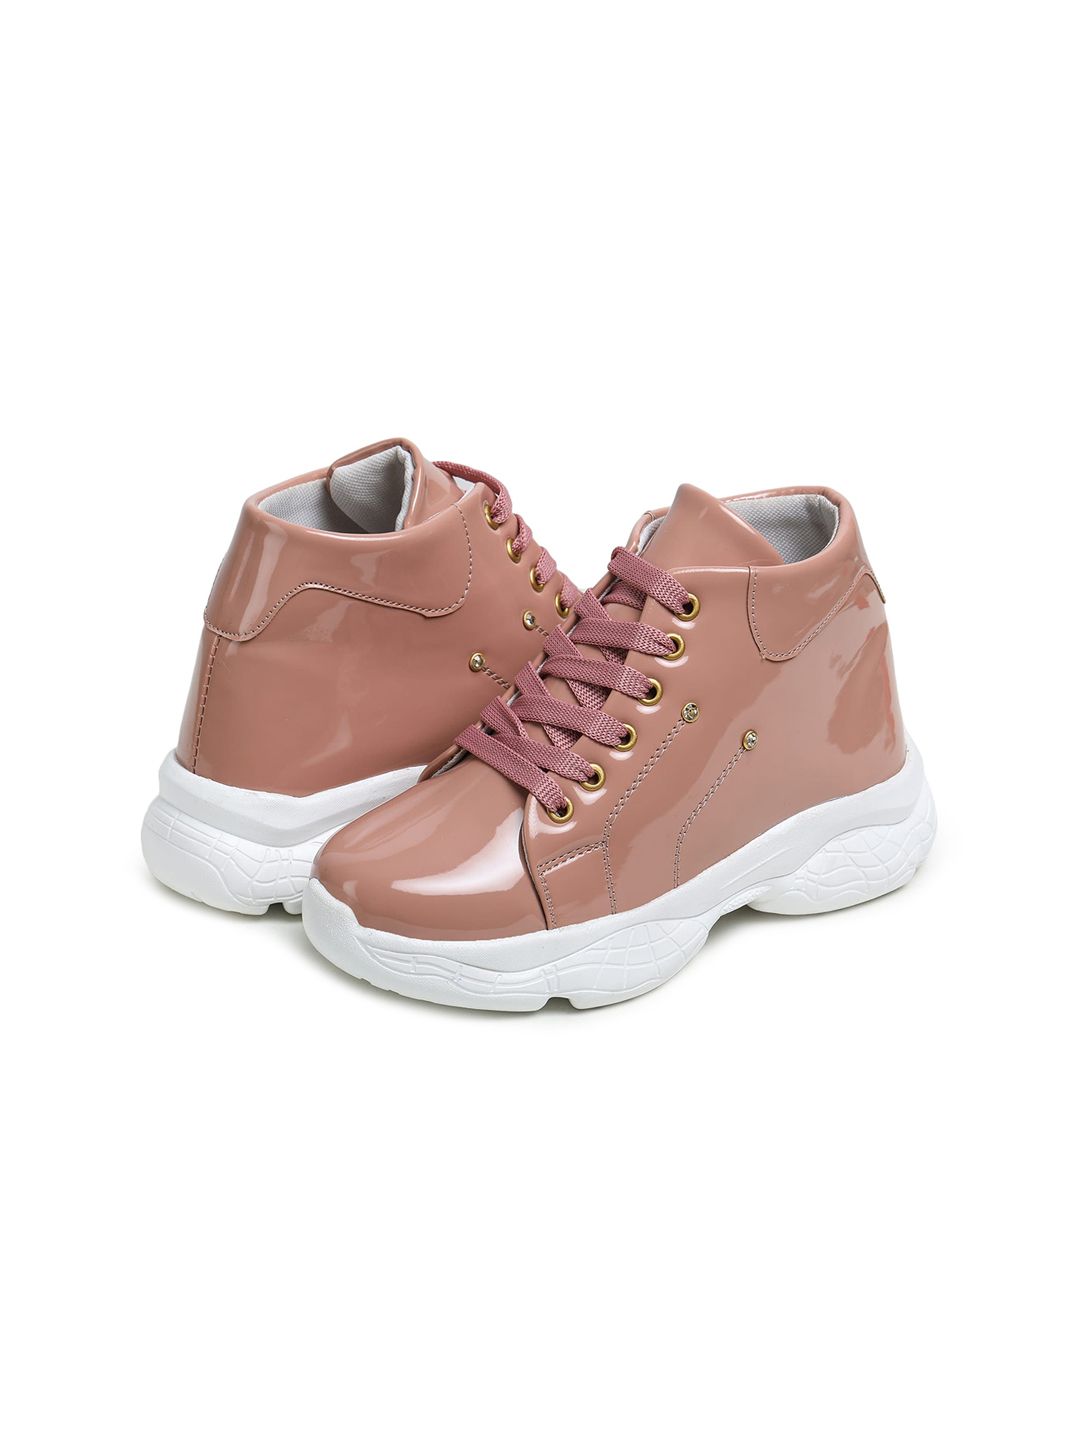 BOOTCO Women Peach-Coloured Sneakers Price in India